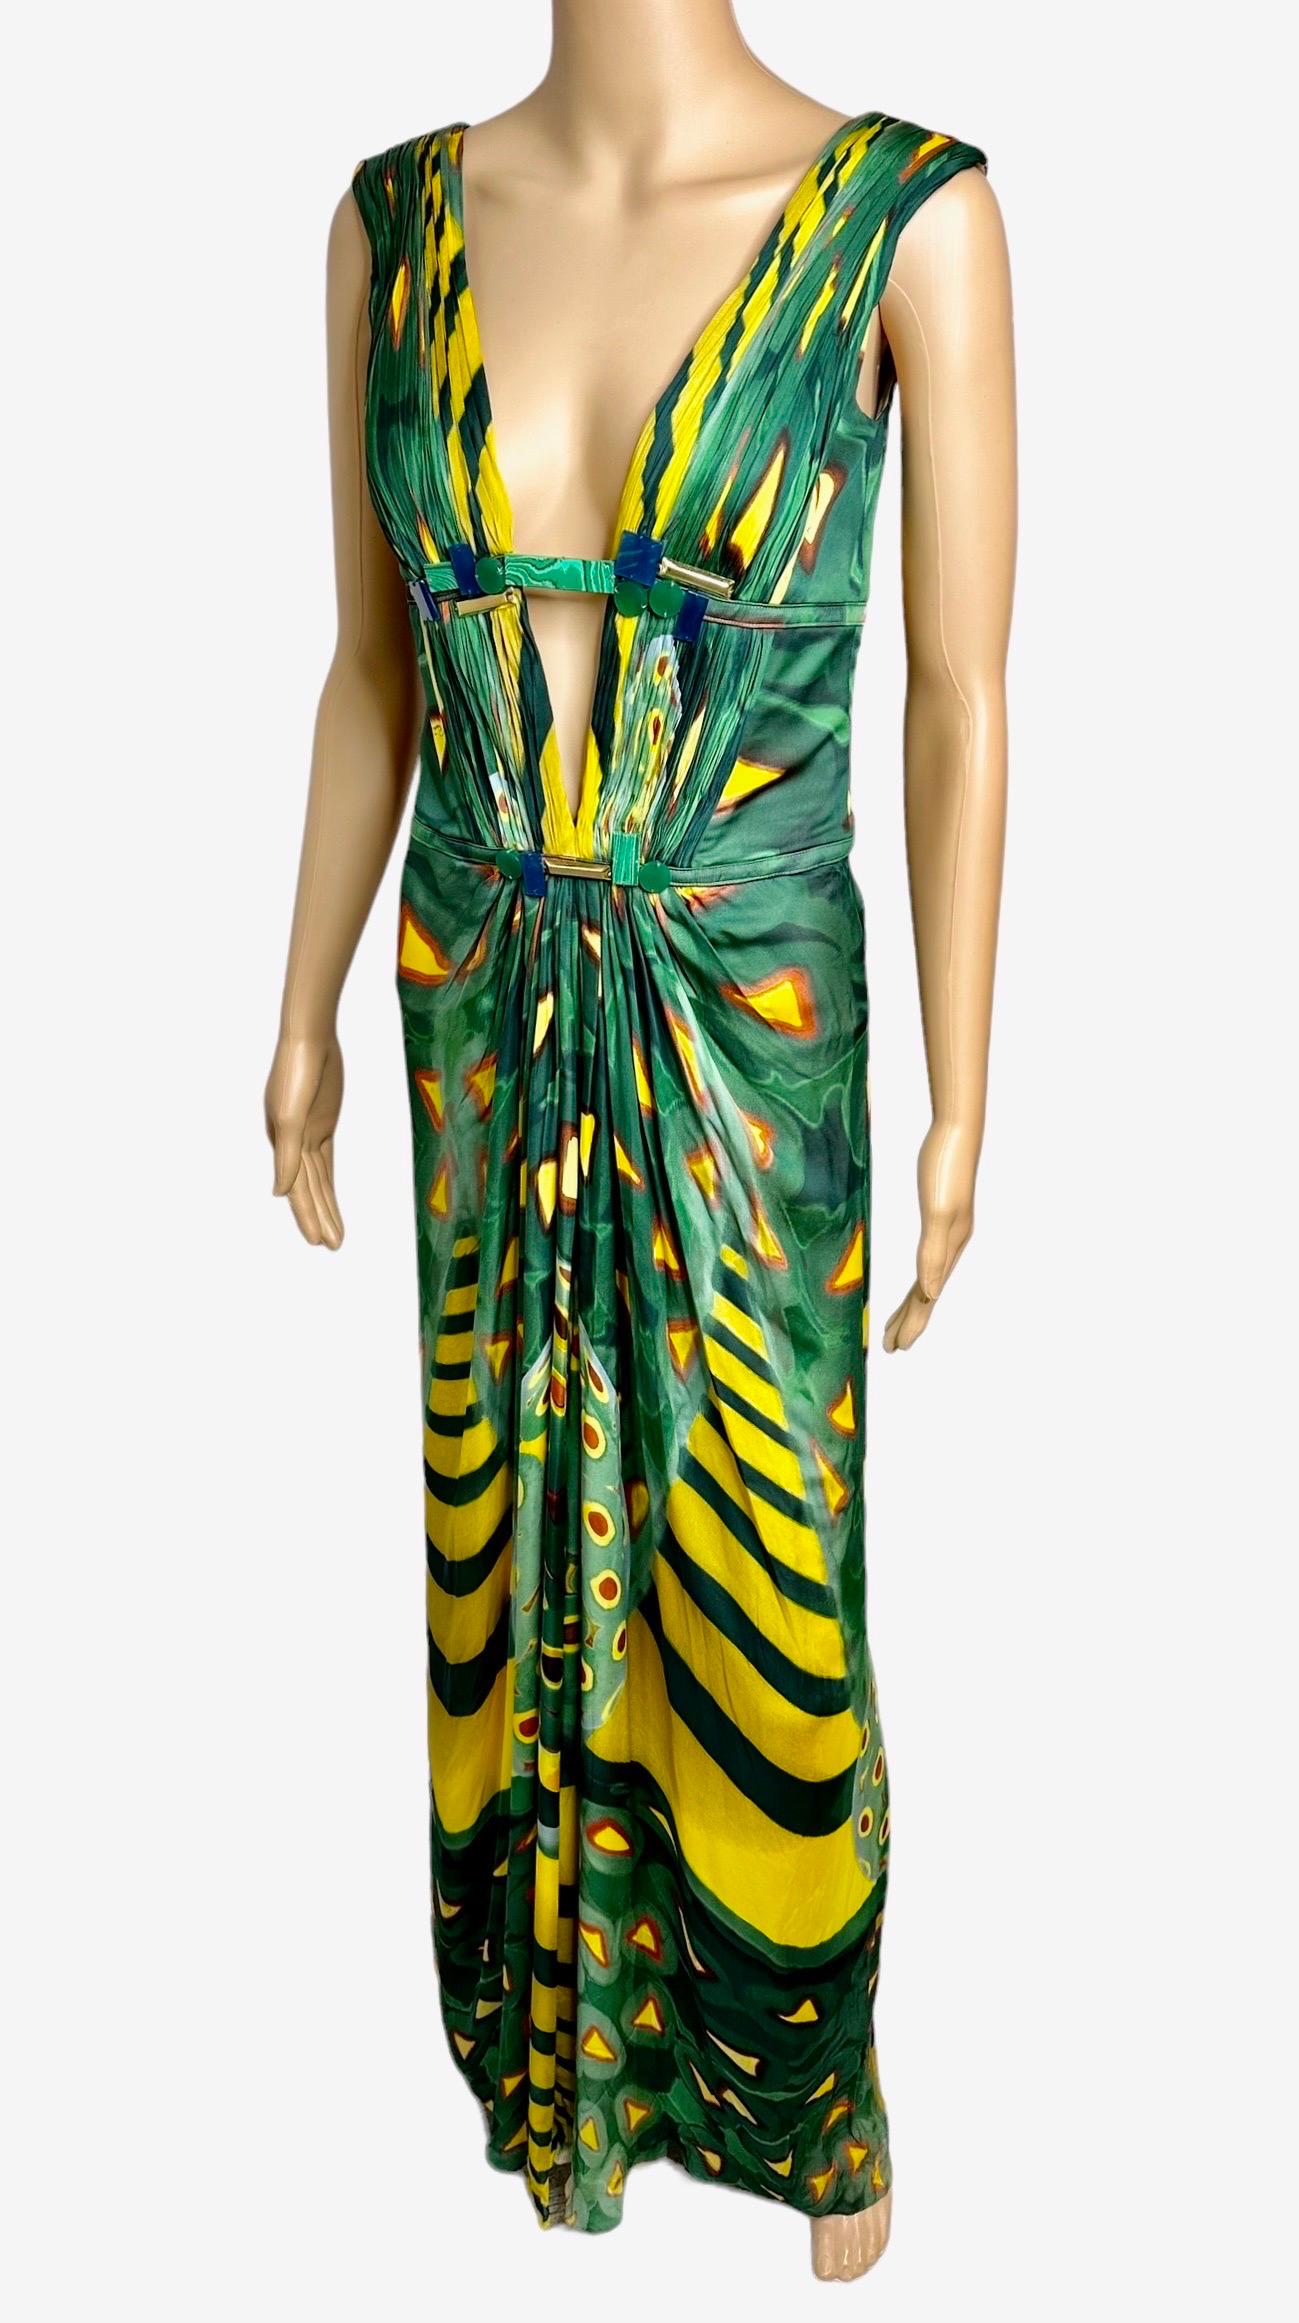 Roberto Cavalli 2009 Sexy Plunging Neckline Open Back Evening Dress Gown 

Roberto Cavalli abstract print evening dress featuring gathering on the bodice, deep plunging neckline, cutout back and concealed zip closure at center back. Please note